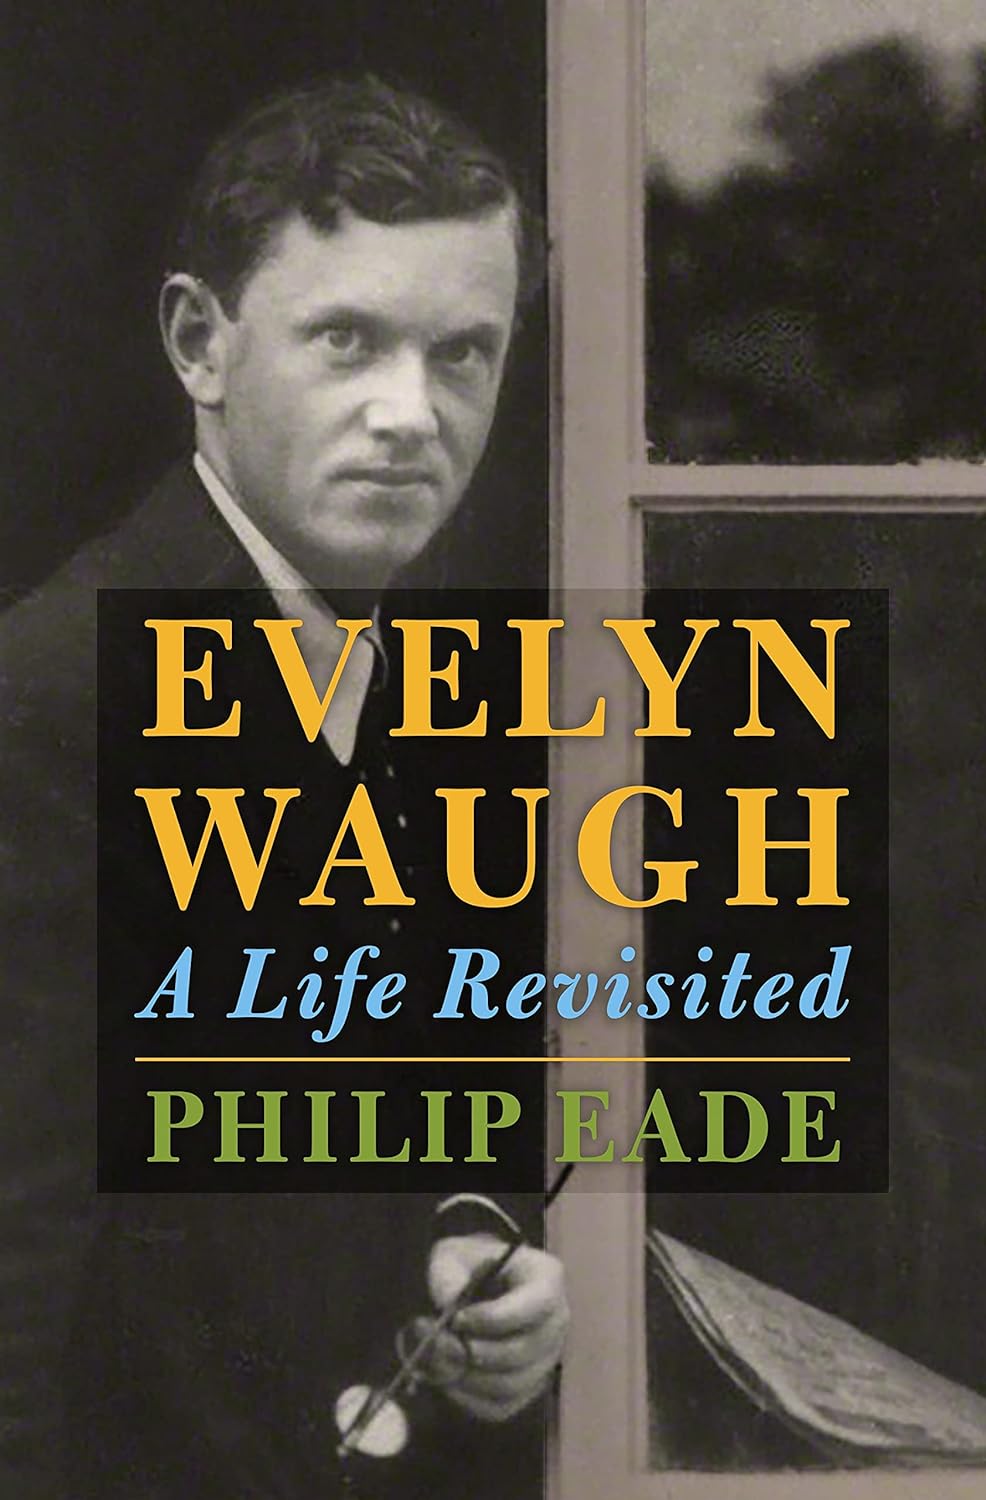 Evelyn Waugh: A Life Revisited, by Philip Eade